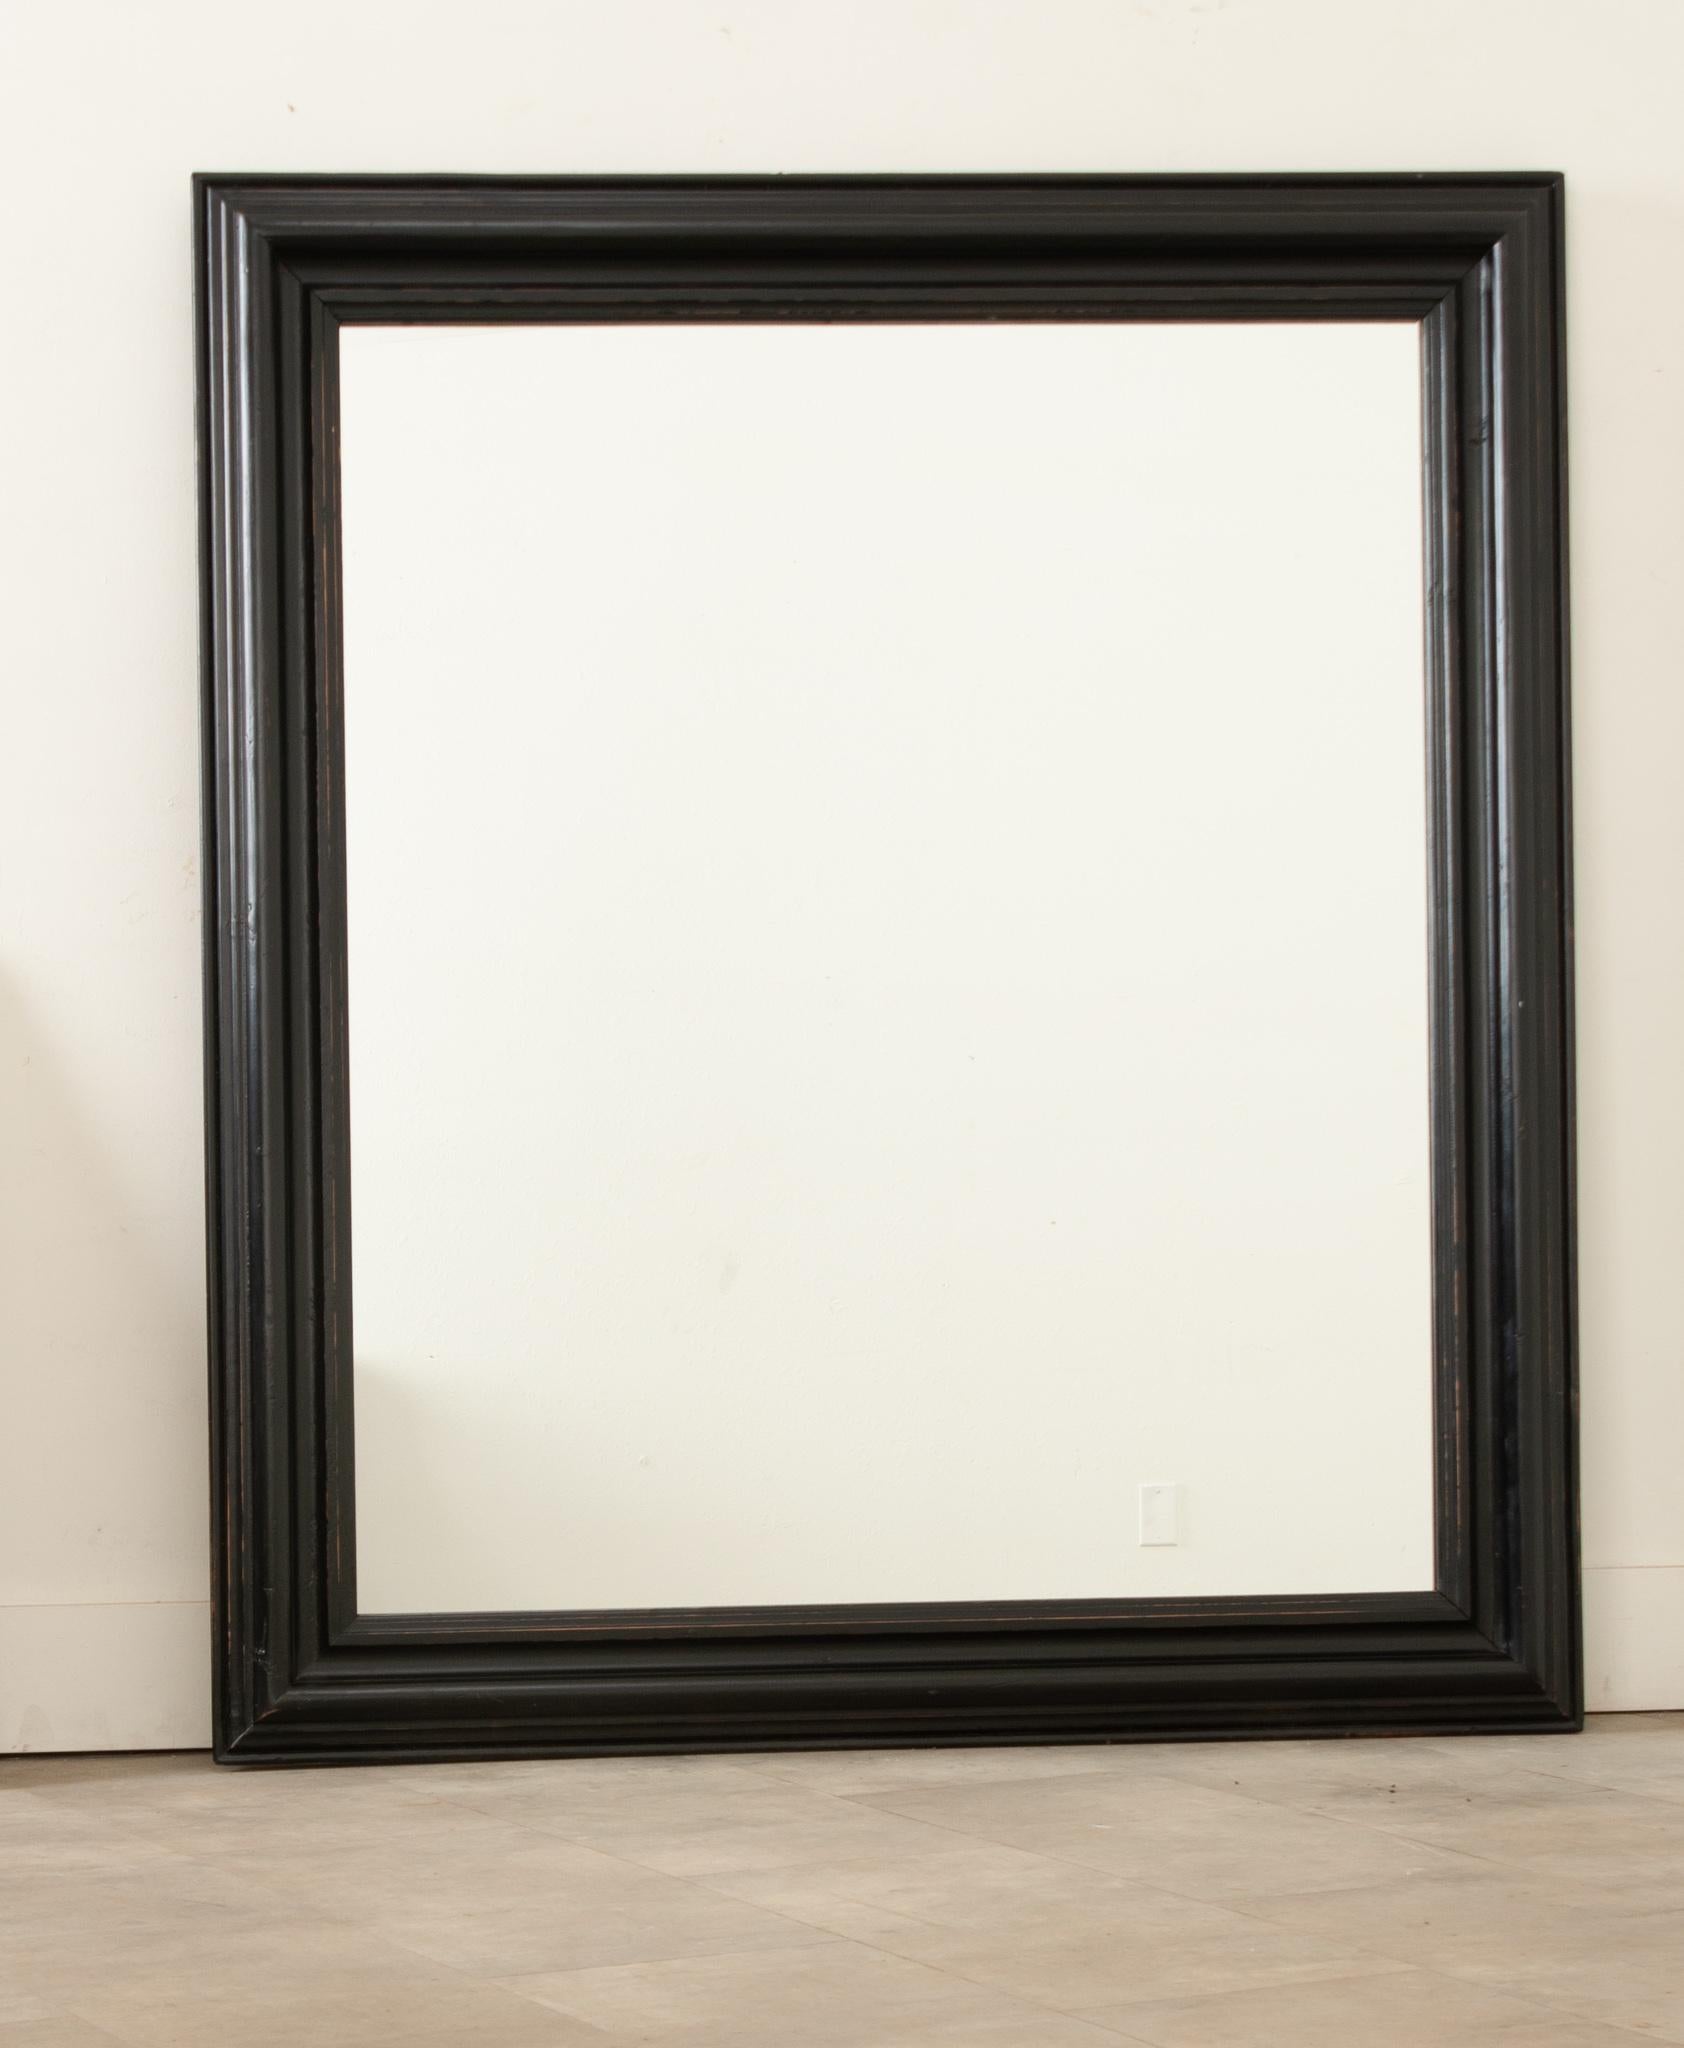 A very fetching French late 19th century ebony symmetrical bistro mirror with original glass and an ogee frame. Dating circa 1870 this charming mirror has a lovely patina that pairs its clean lines with visual texture.  A perfect choice for both